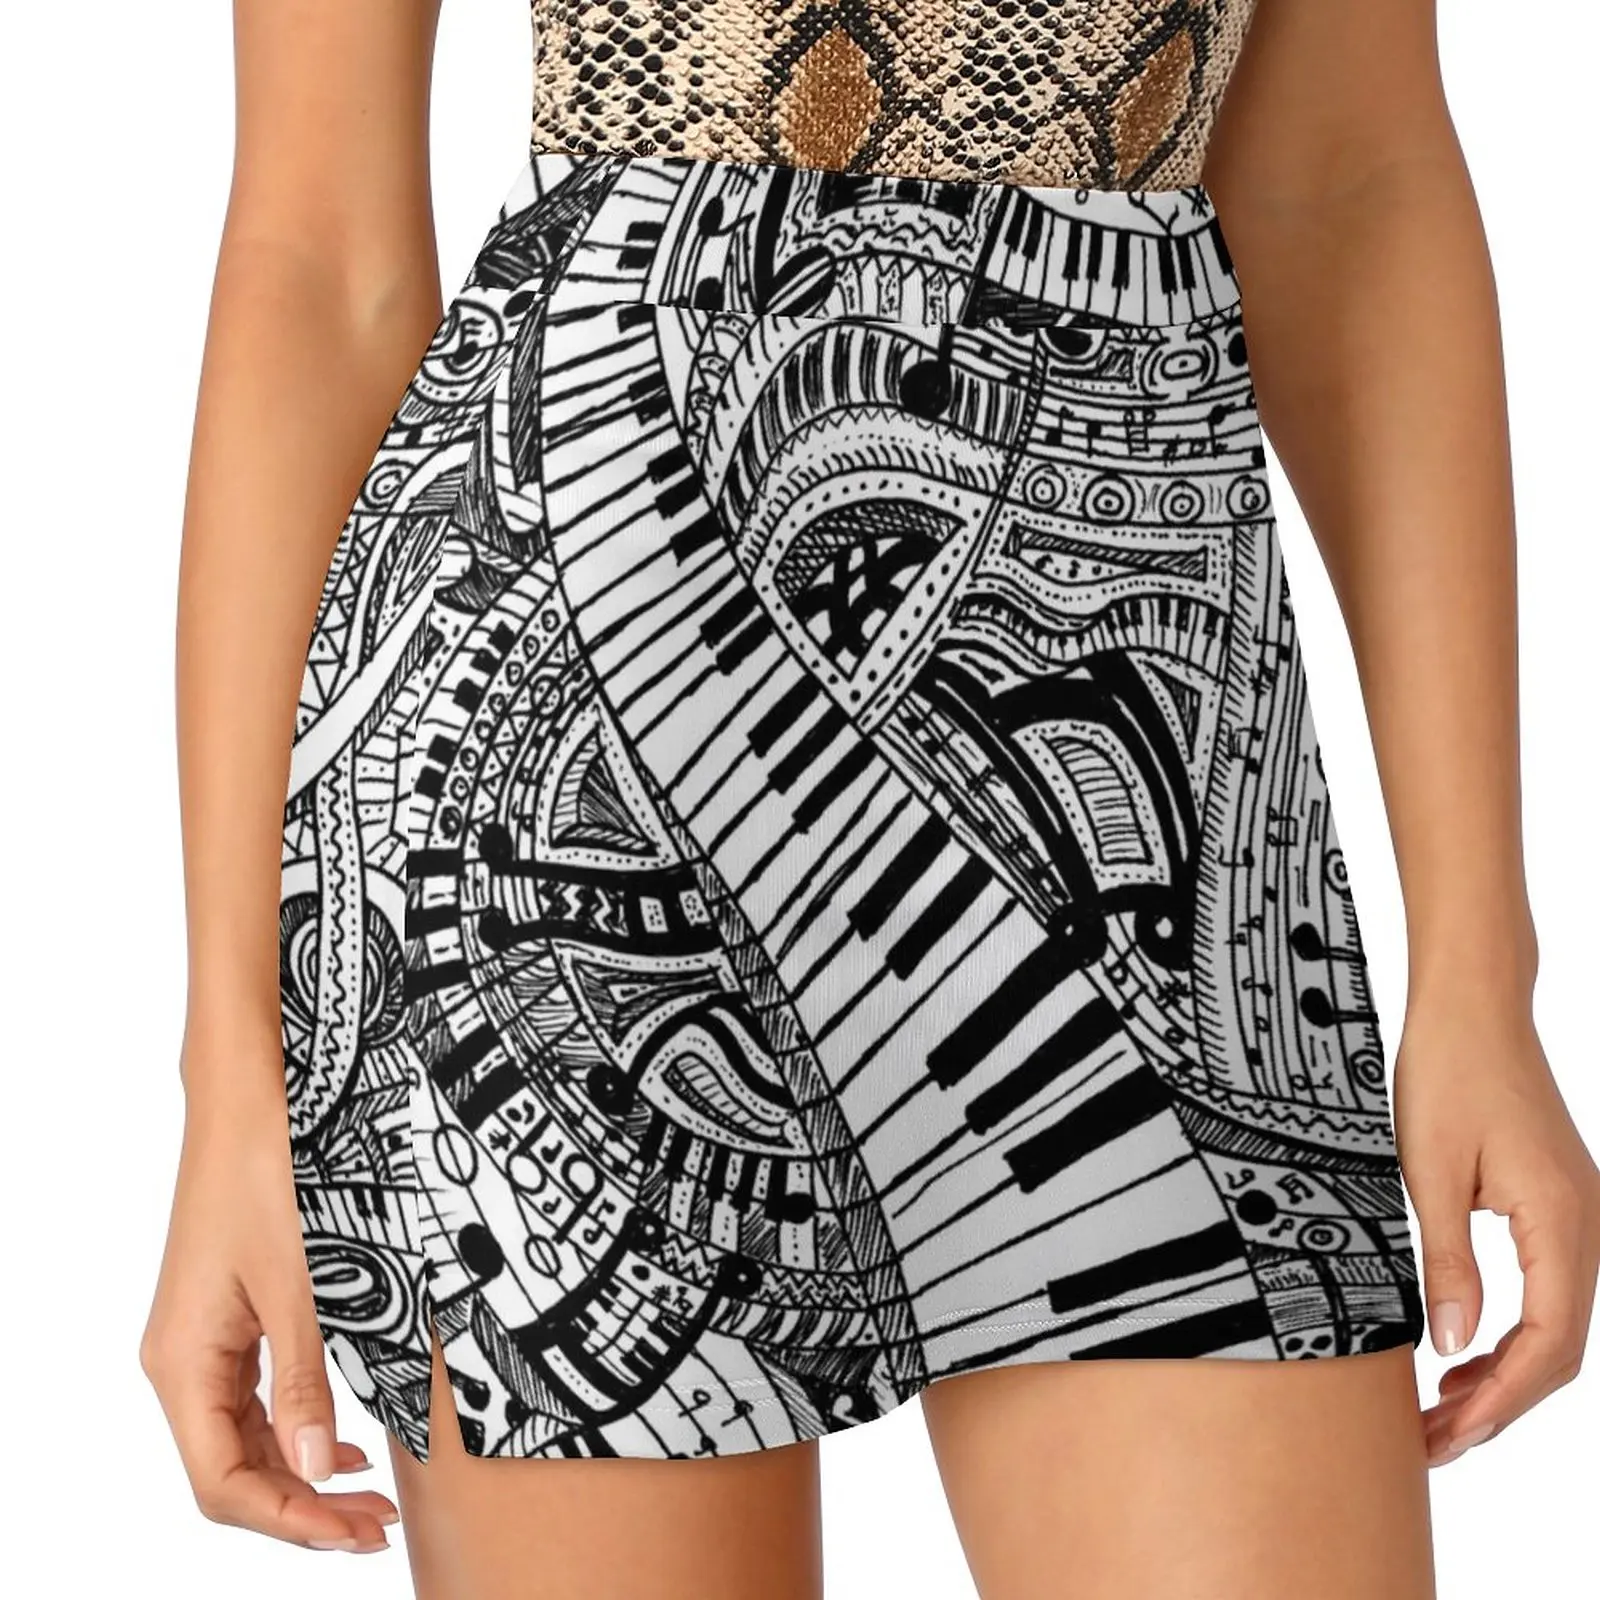 Classical music doodle with piano keyboard Light Proof Trouser Skirt novelty in clothes festival outfit women extreme mini dress reddachic women two piece skirt set high waist bandage denim skirt with leg warmers cyberpunk y2k vintage music festival outfits